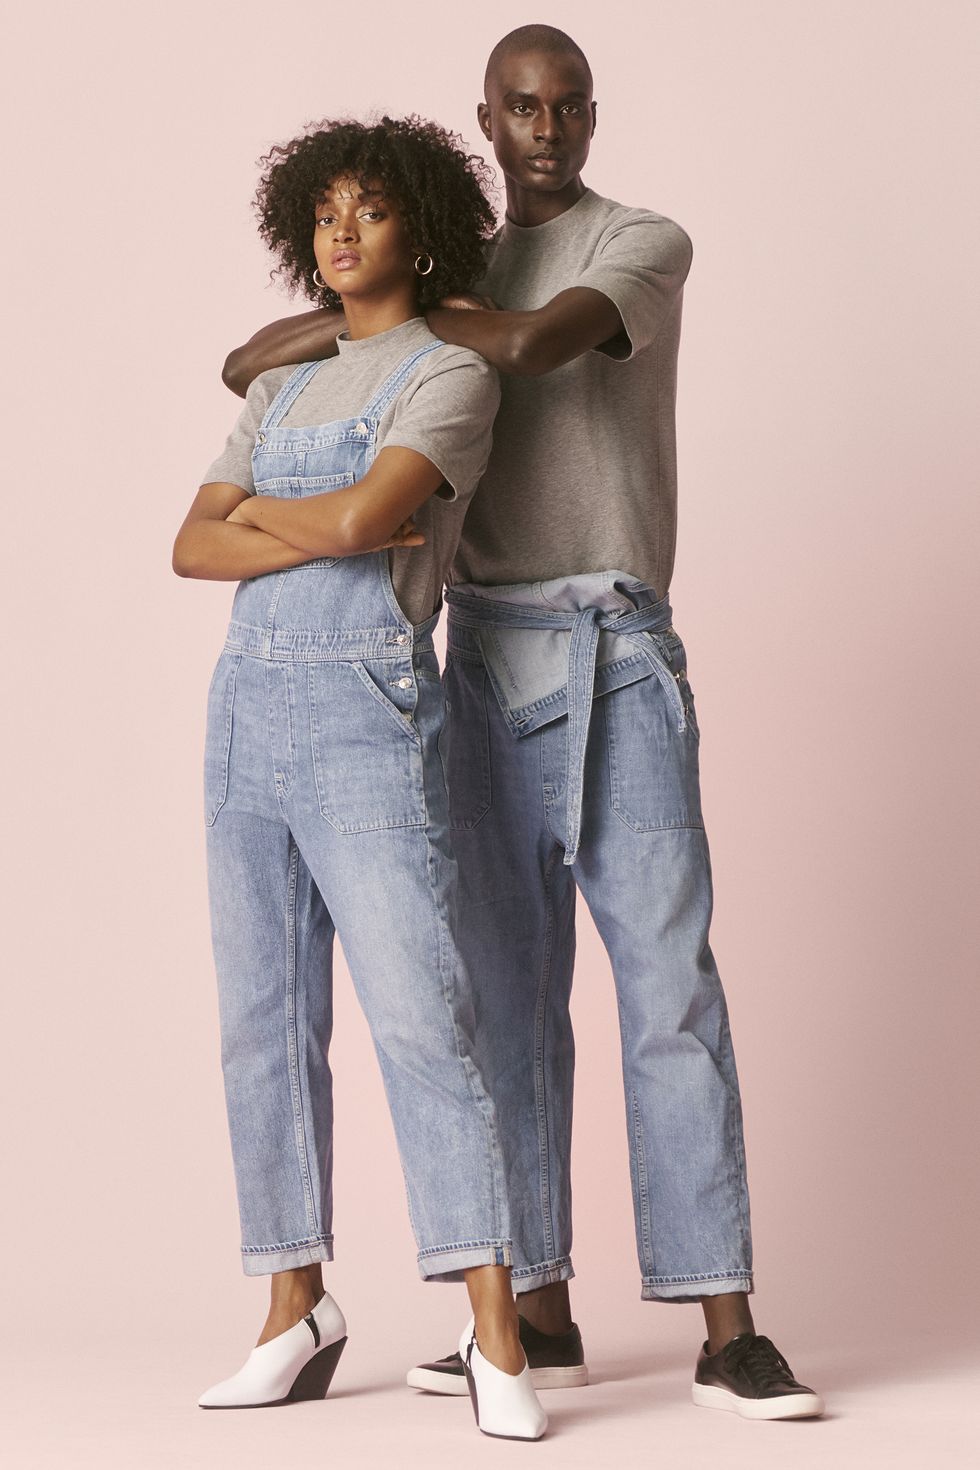 H&M Is Launching a Unisex Collection - H&M Denim United Line